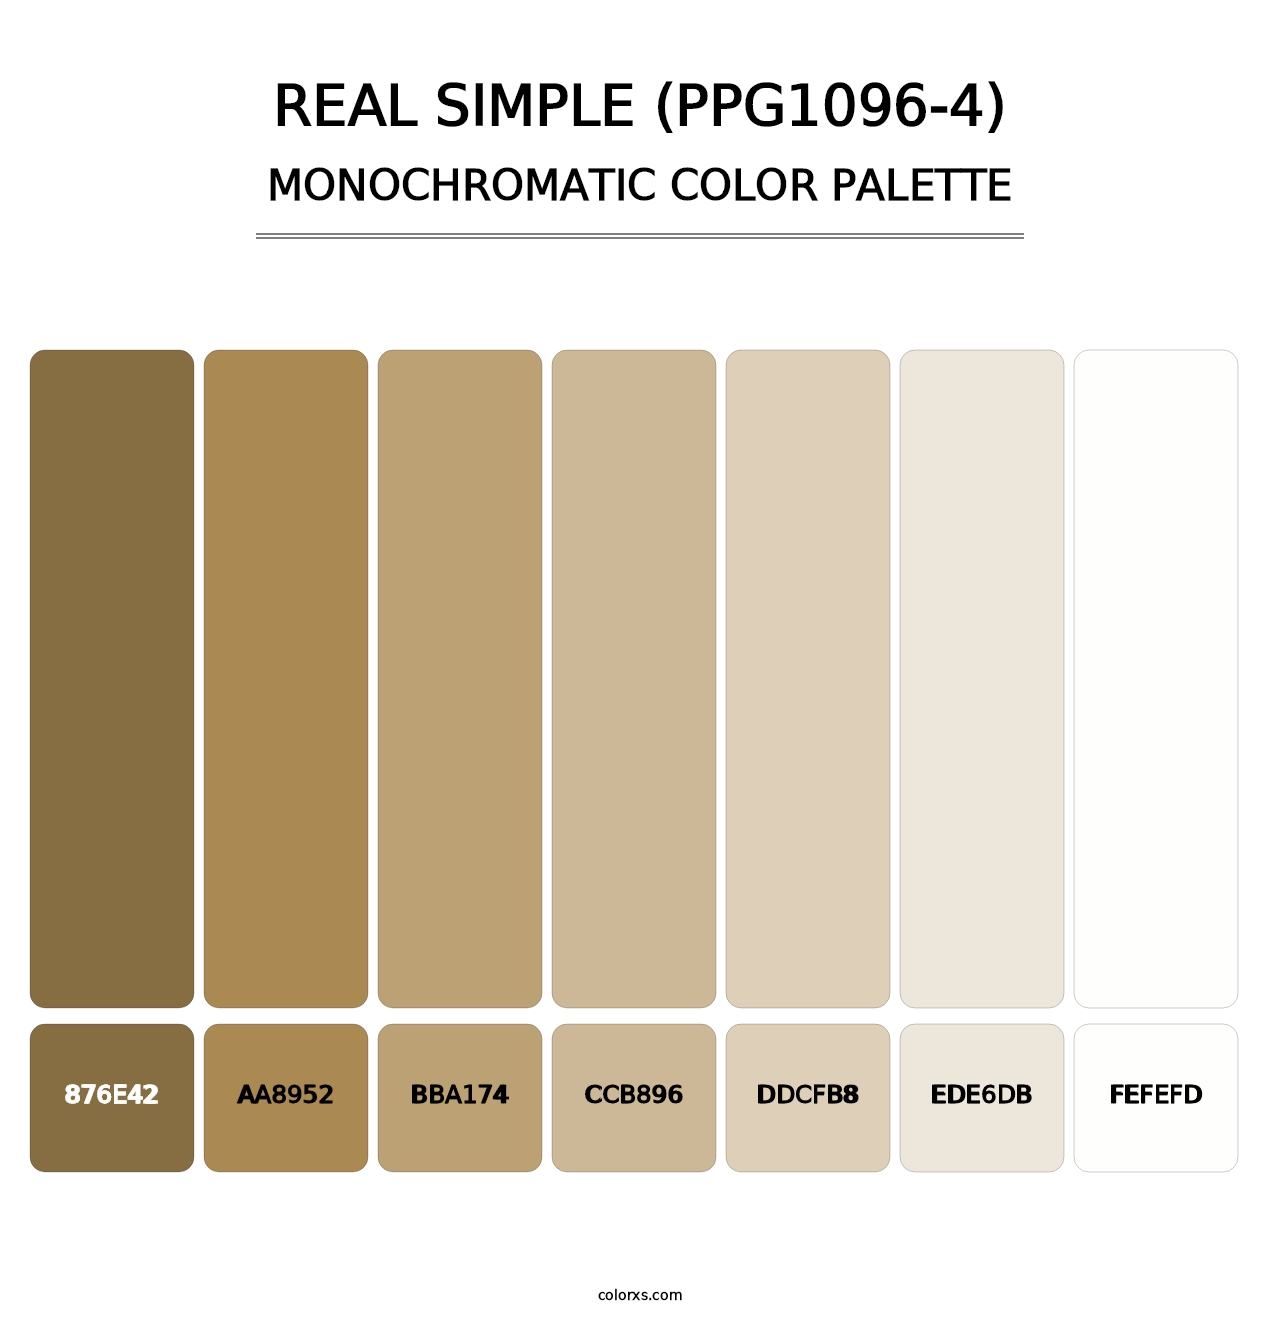 Real Simple (PPG1096-4) - Monochromatic Color Palette